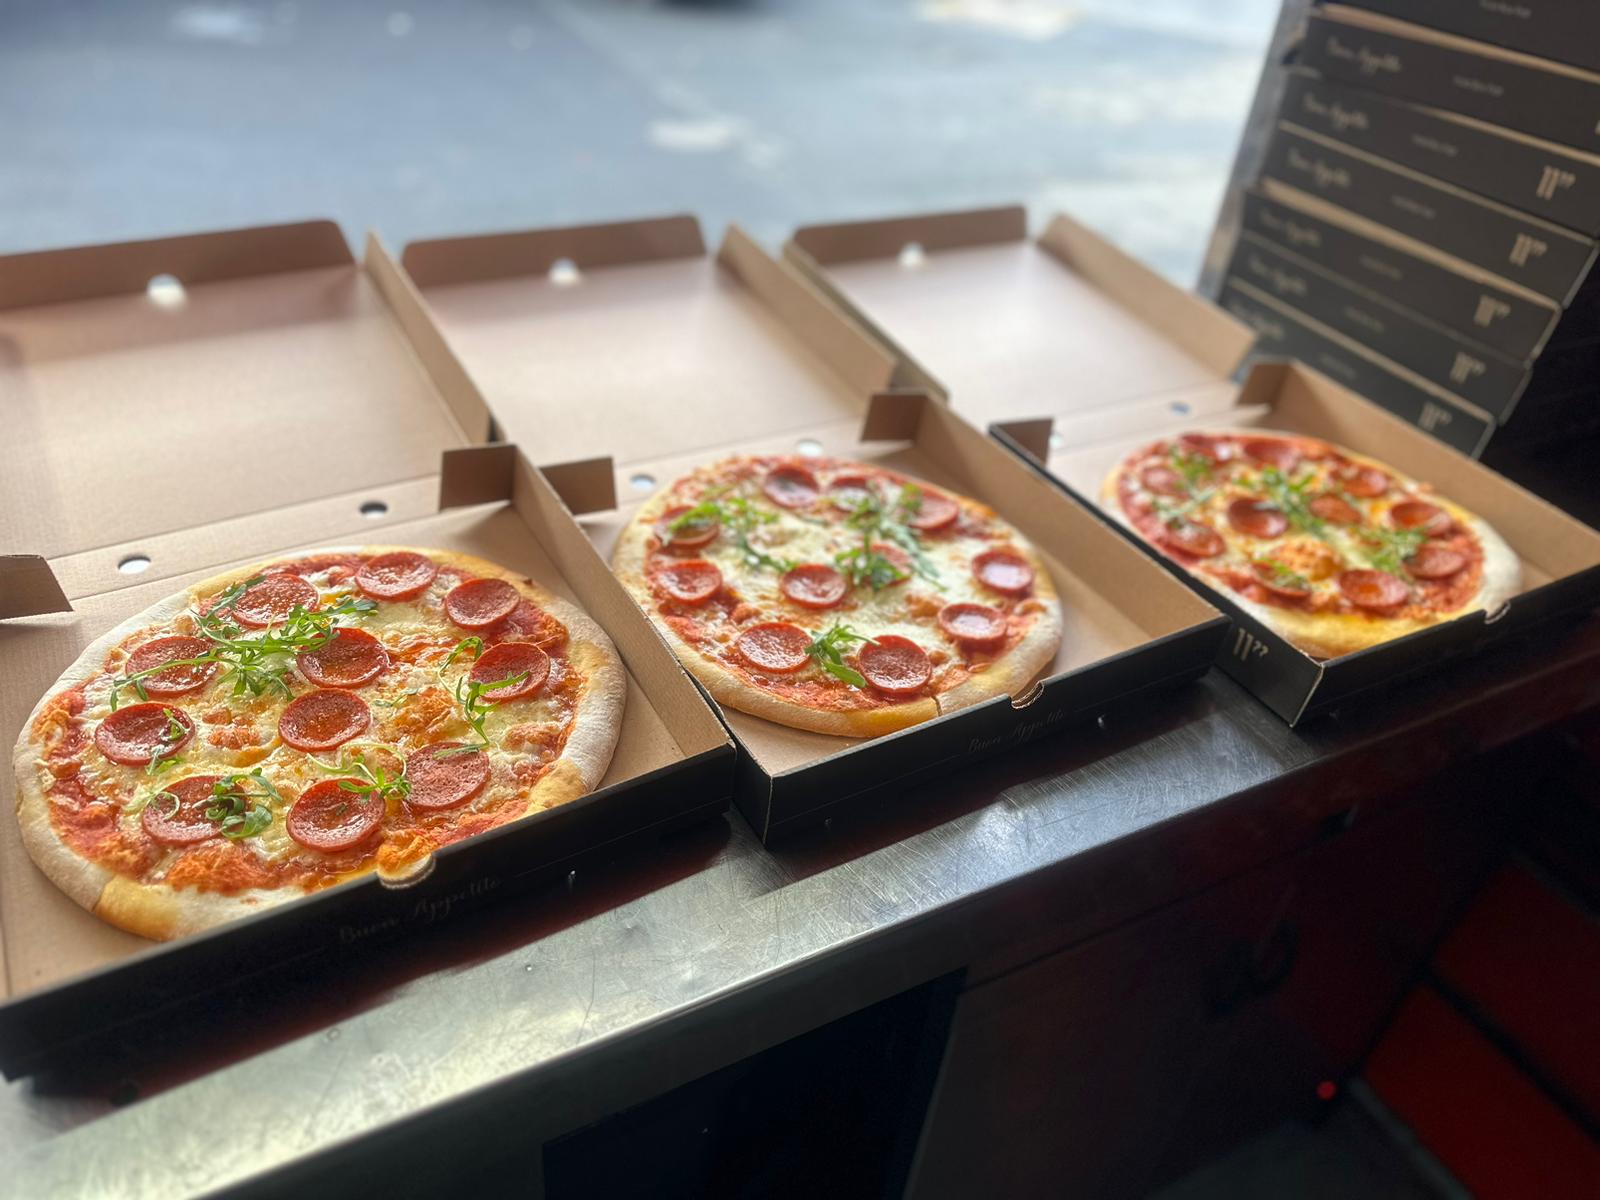 three pepperoni pizzas in pizza boxes on a kk catering van counter